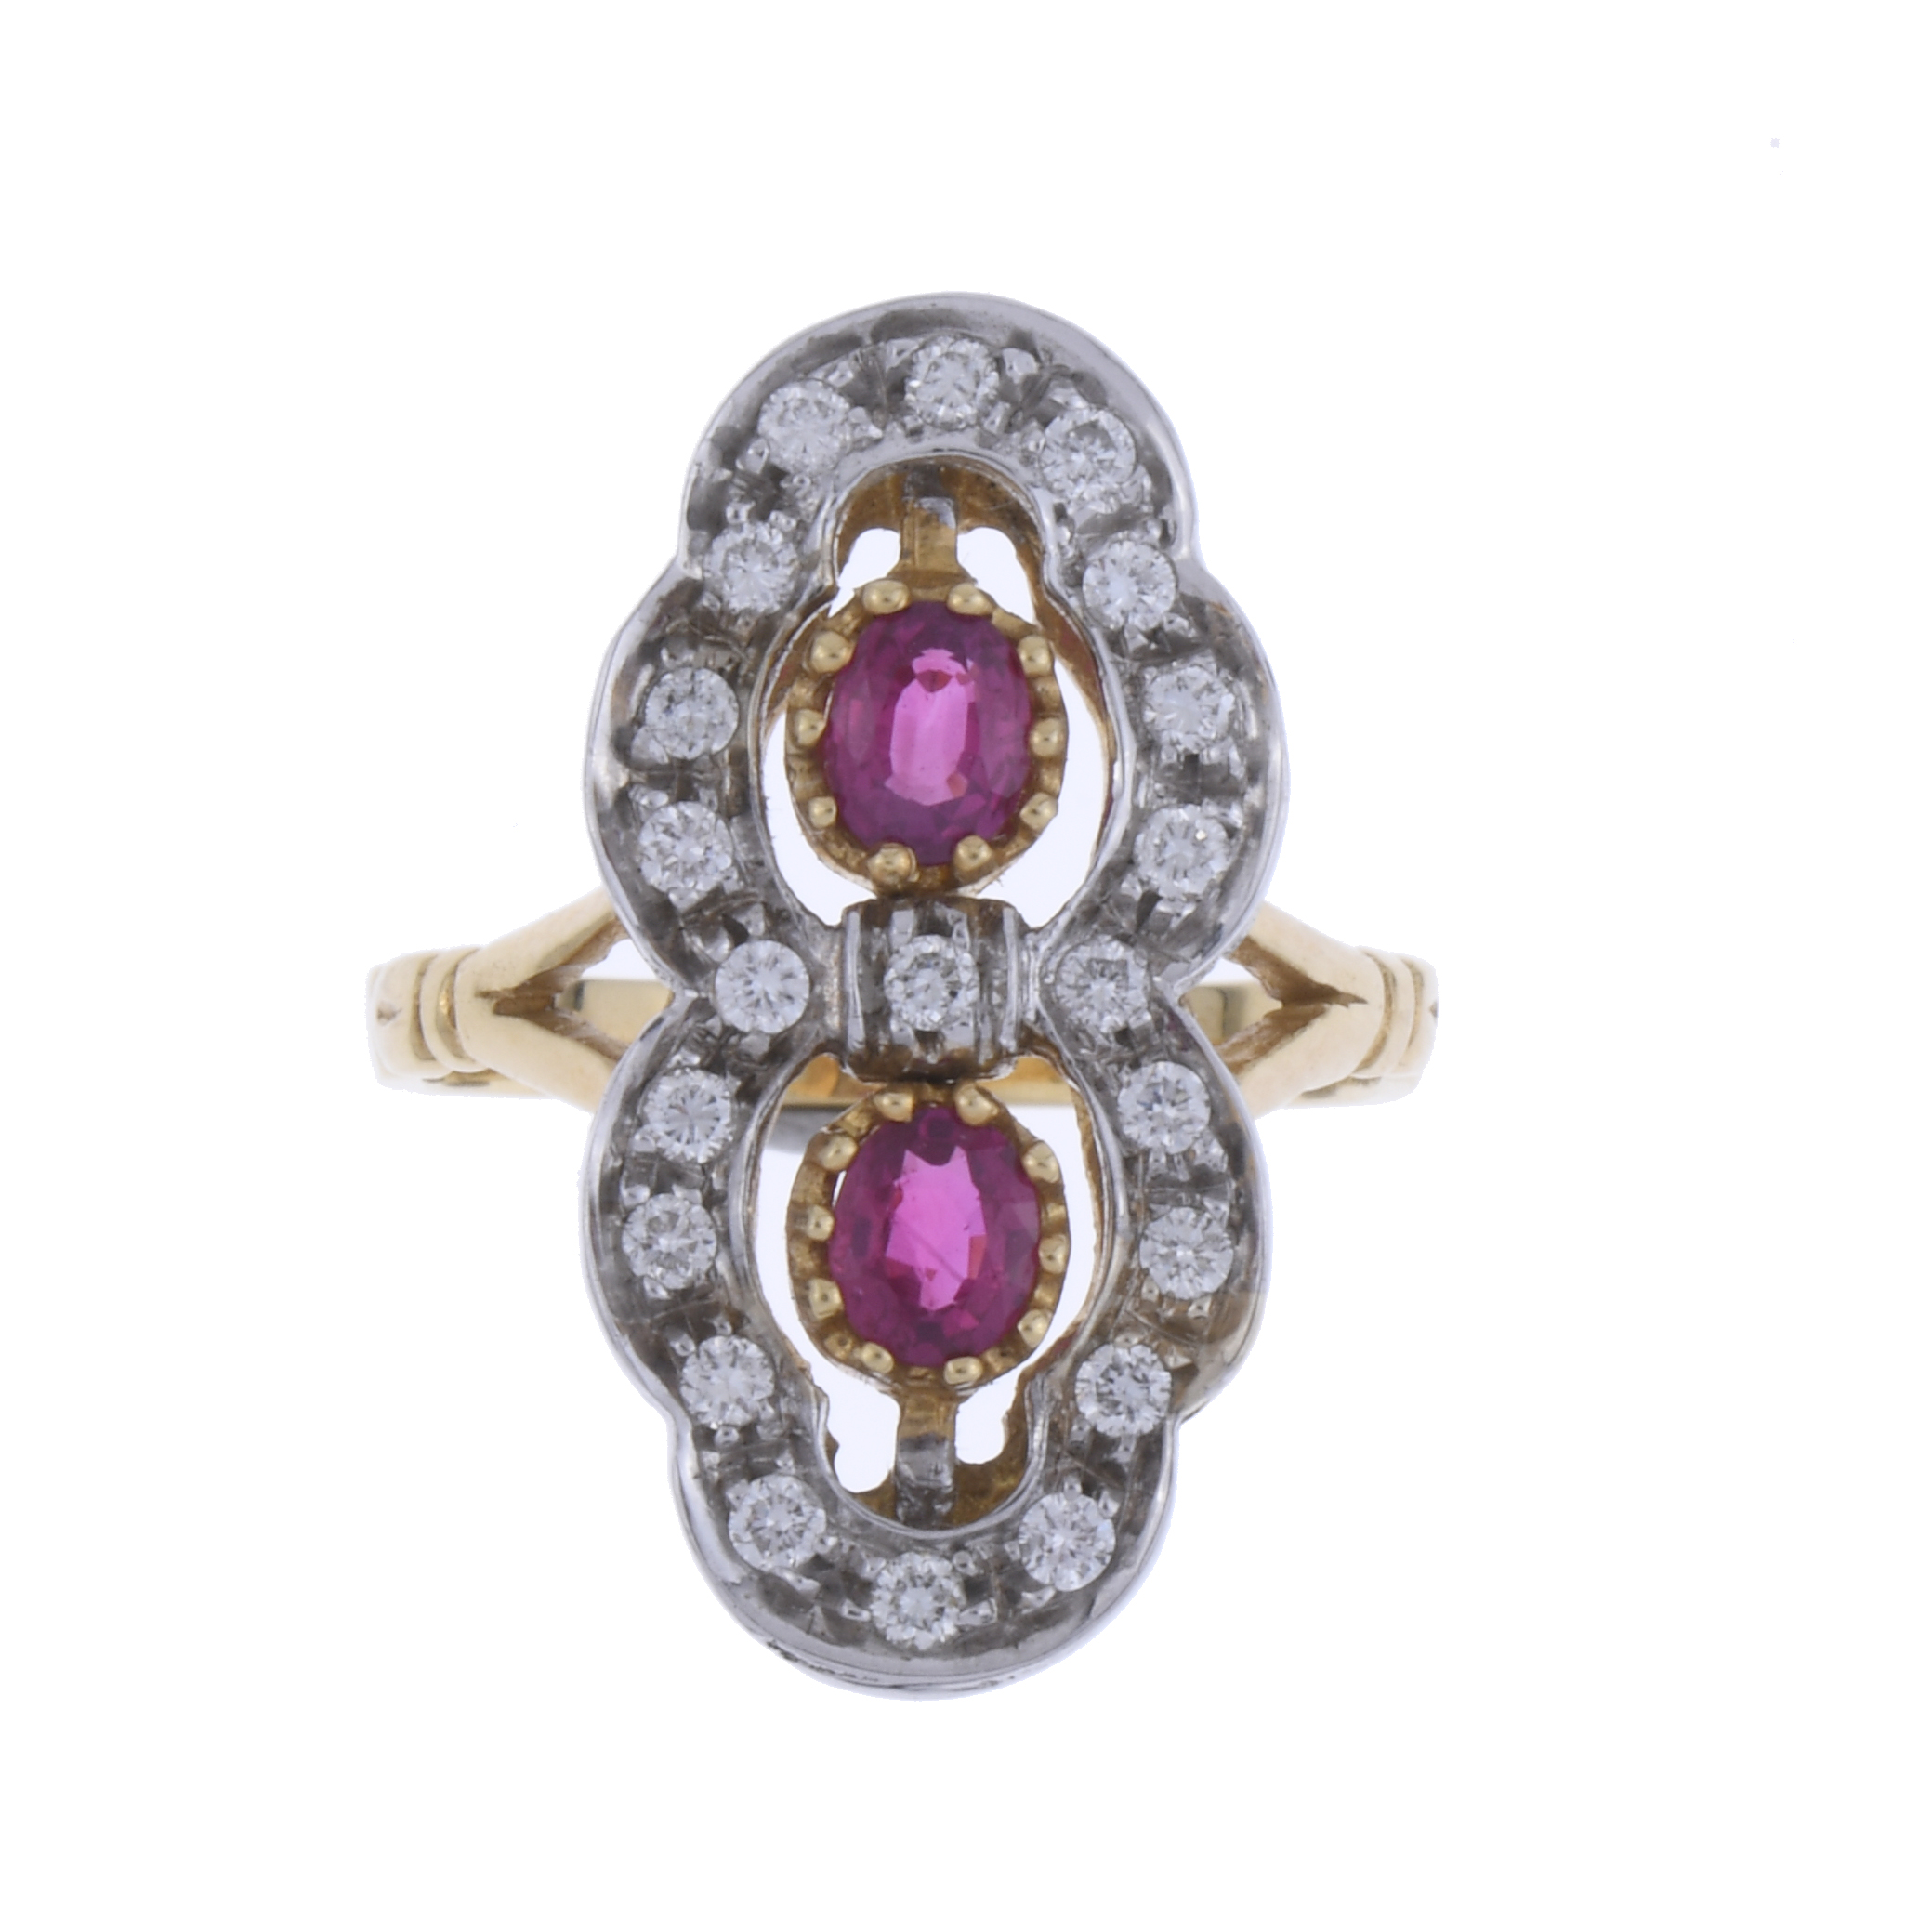 SHUTTLE RING WITH DIAMONDS AND RUBIES.